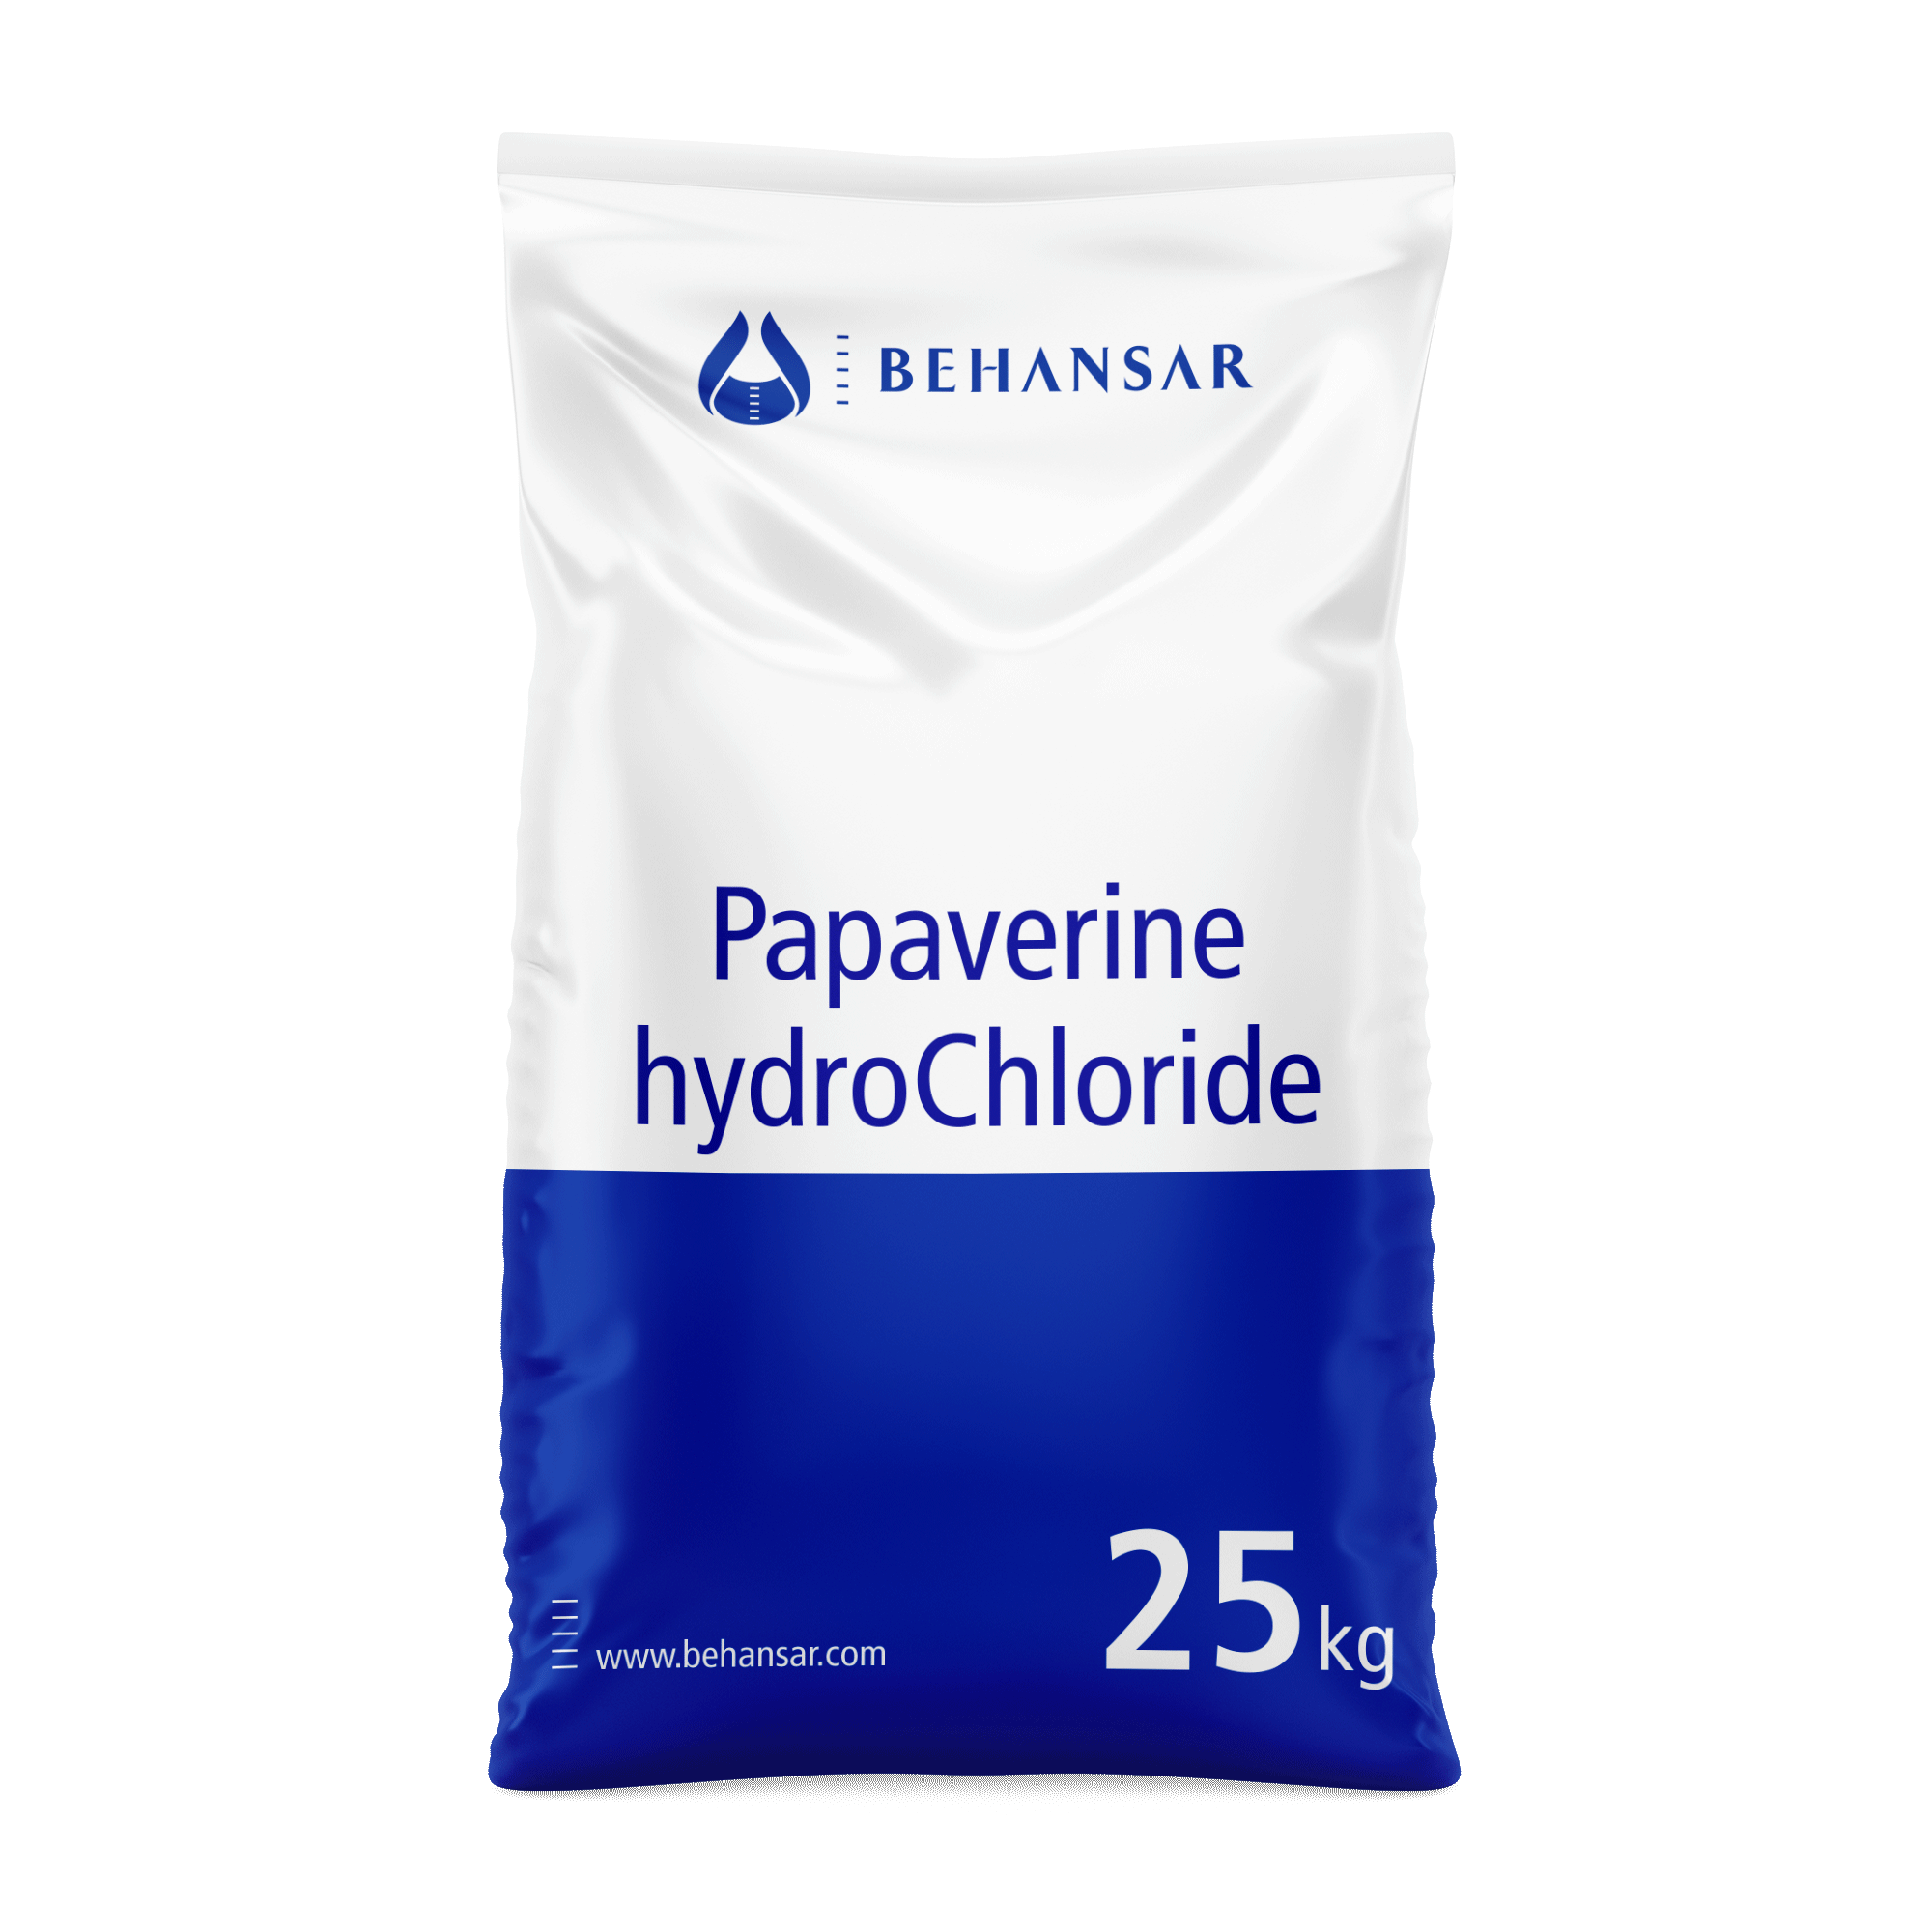 Papaverine hydroChloride is one of the products of Behansar Co